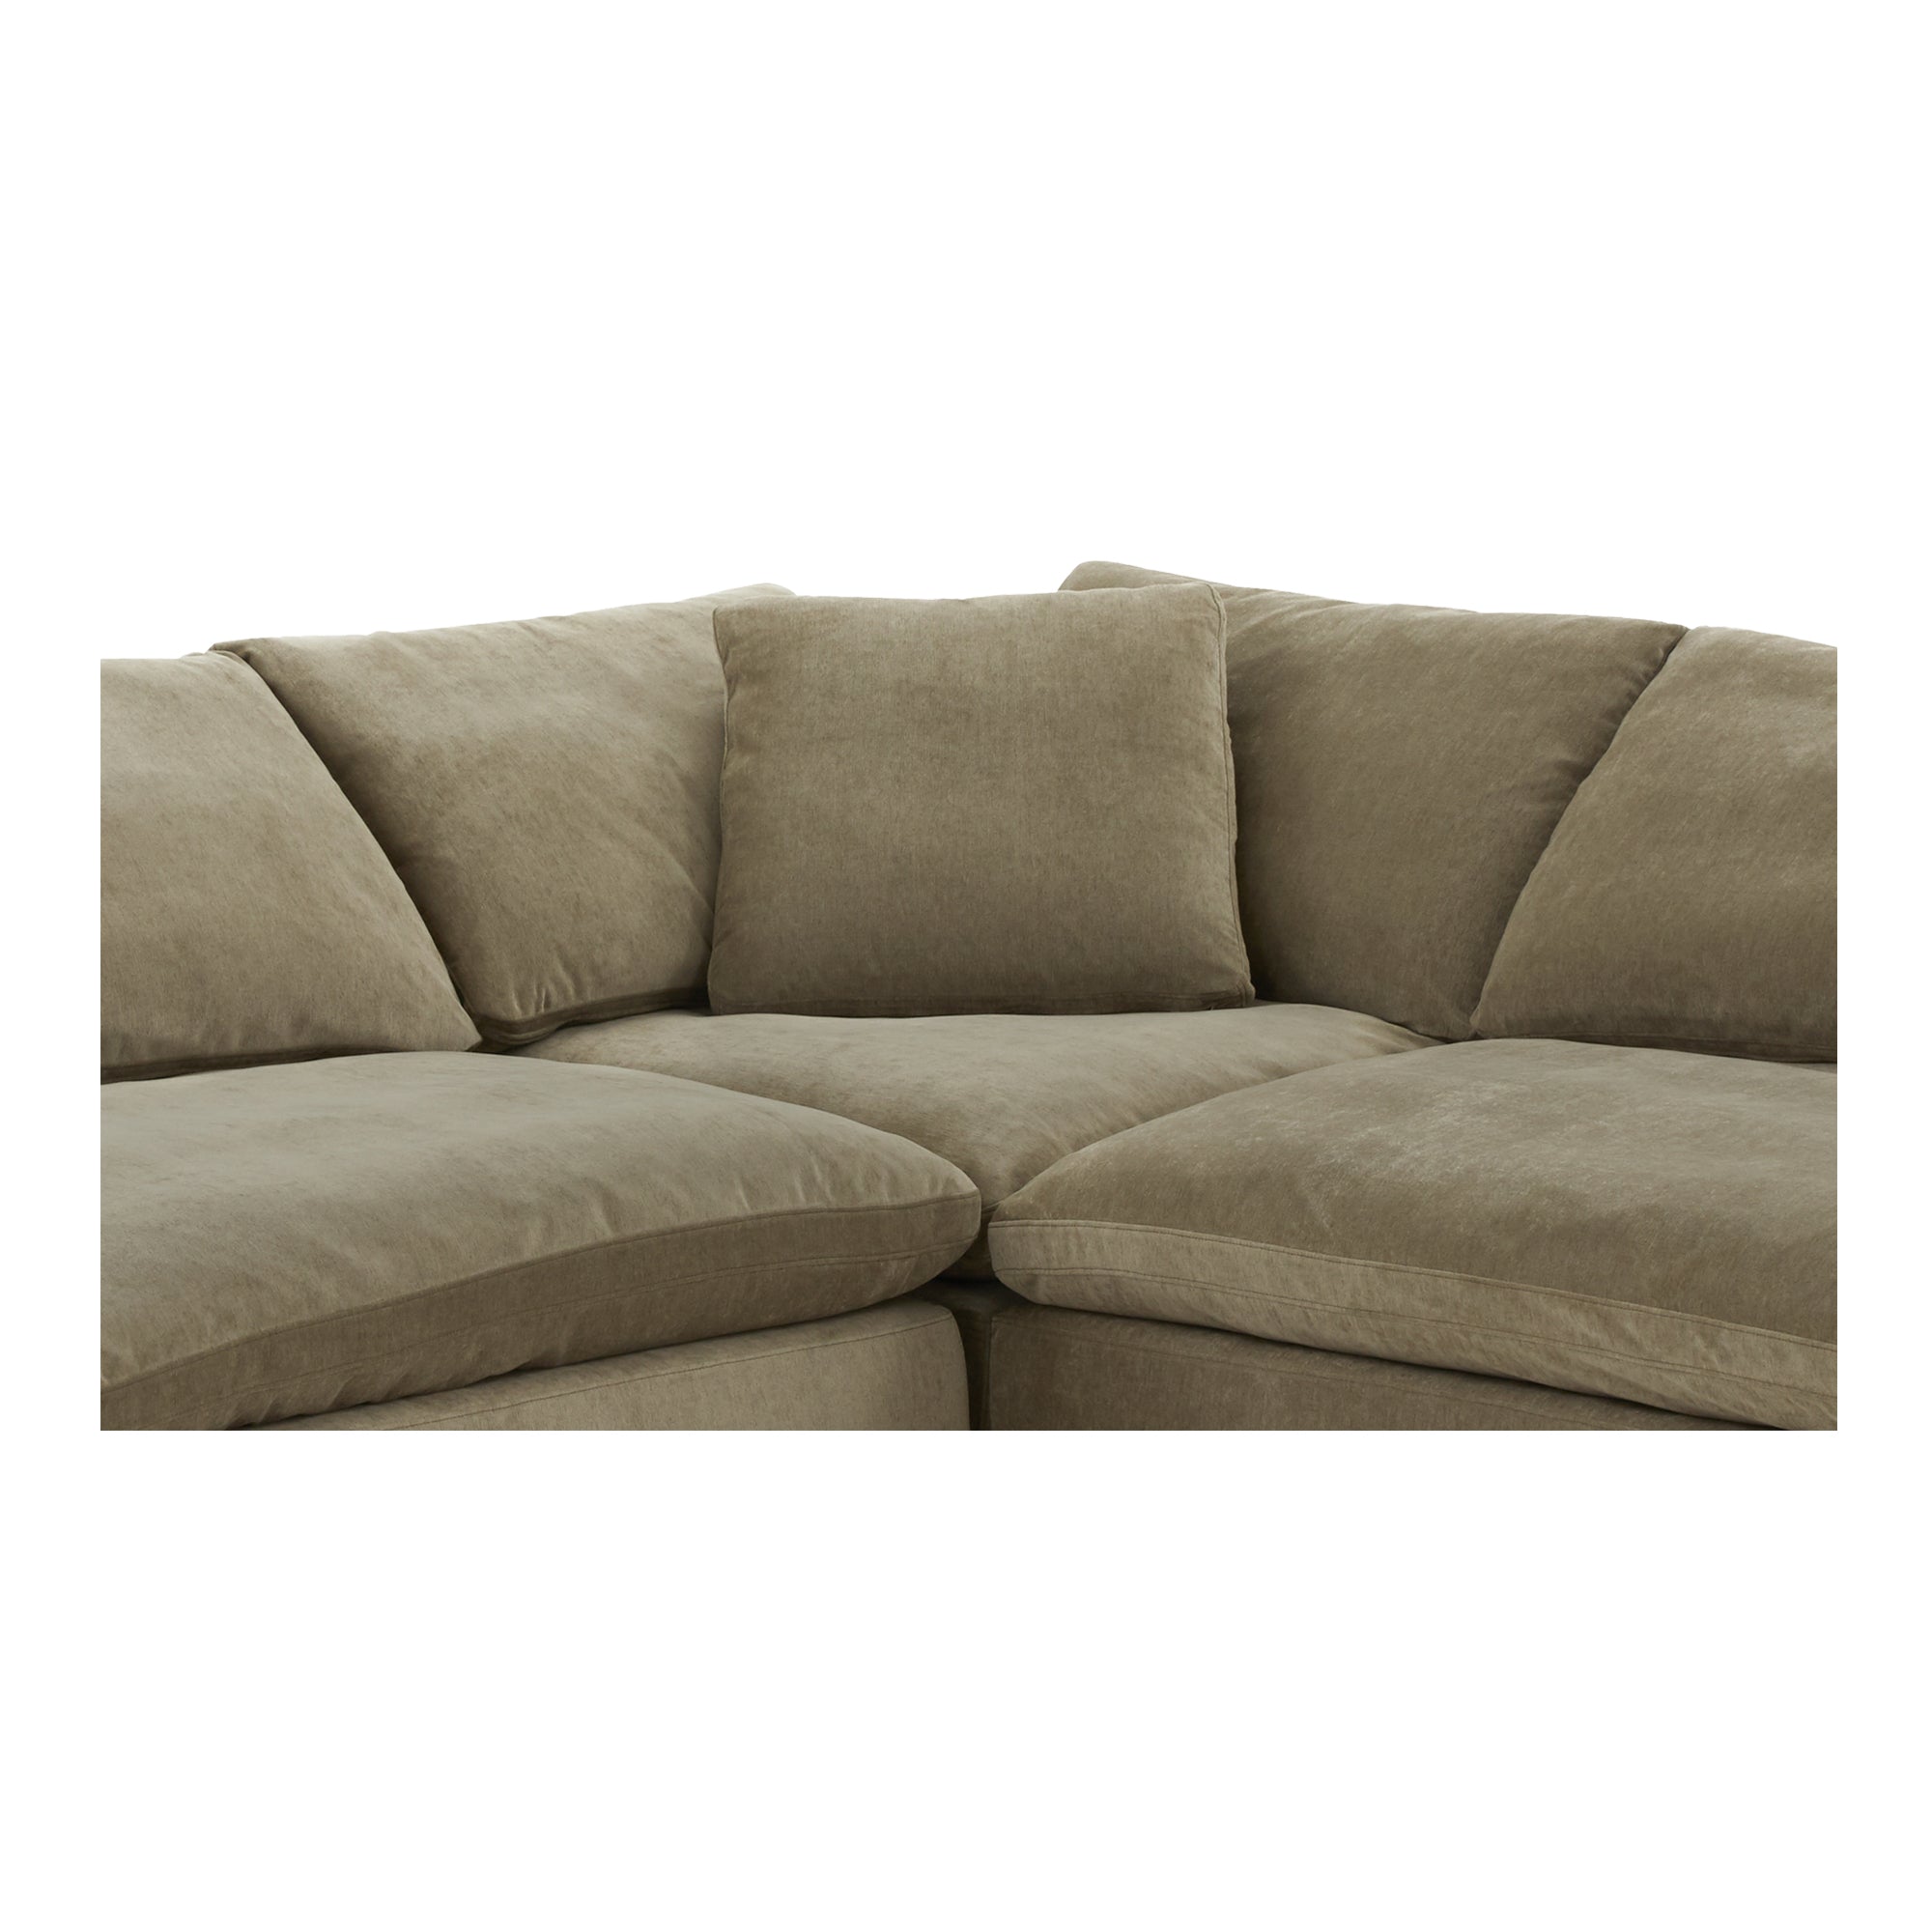 Clay Classic L-Shaped Modular Sectional Desert Sage